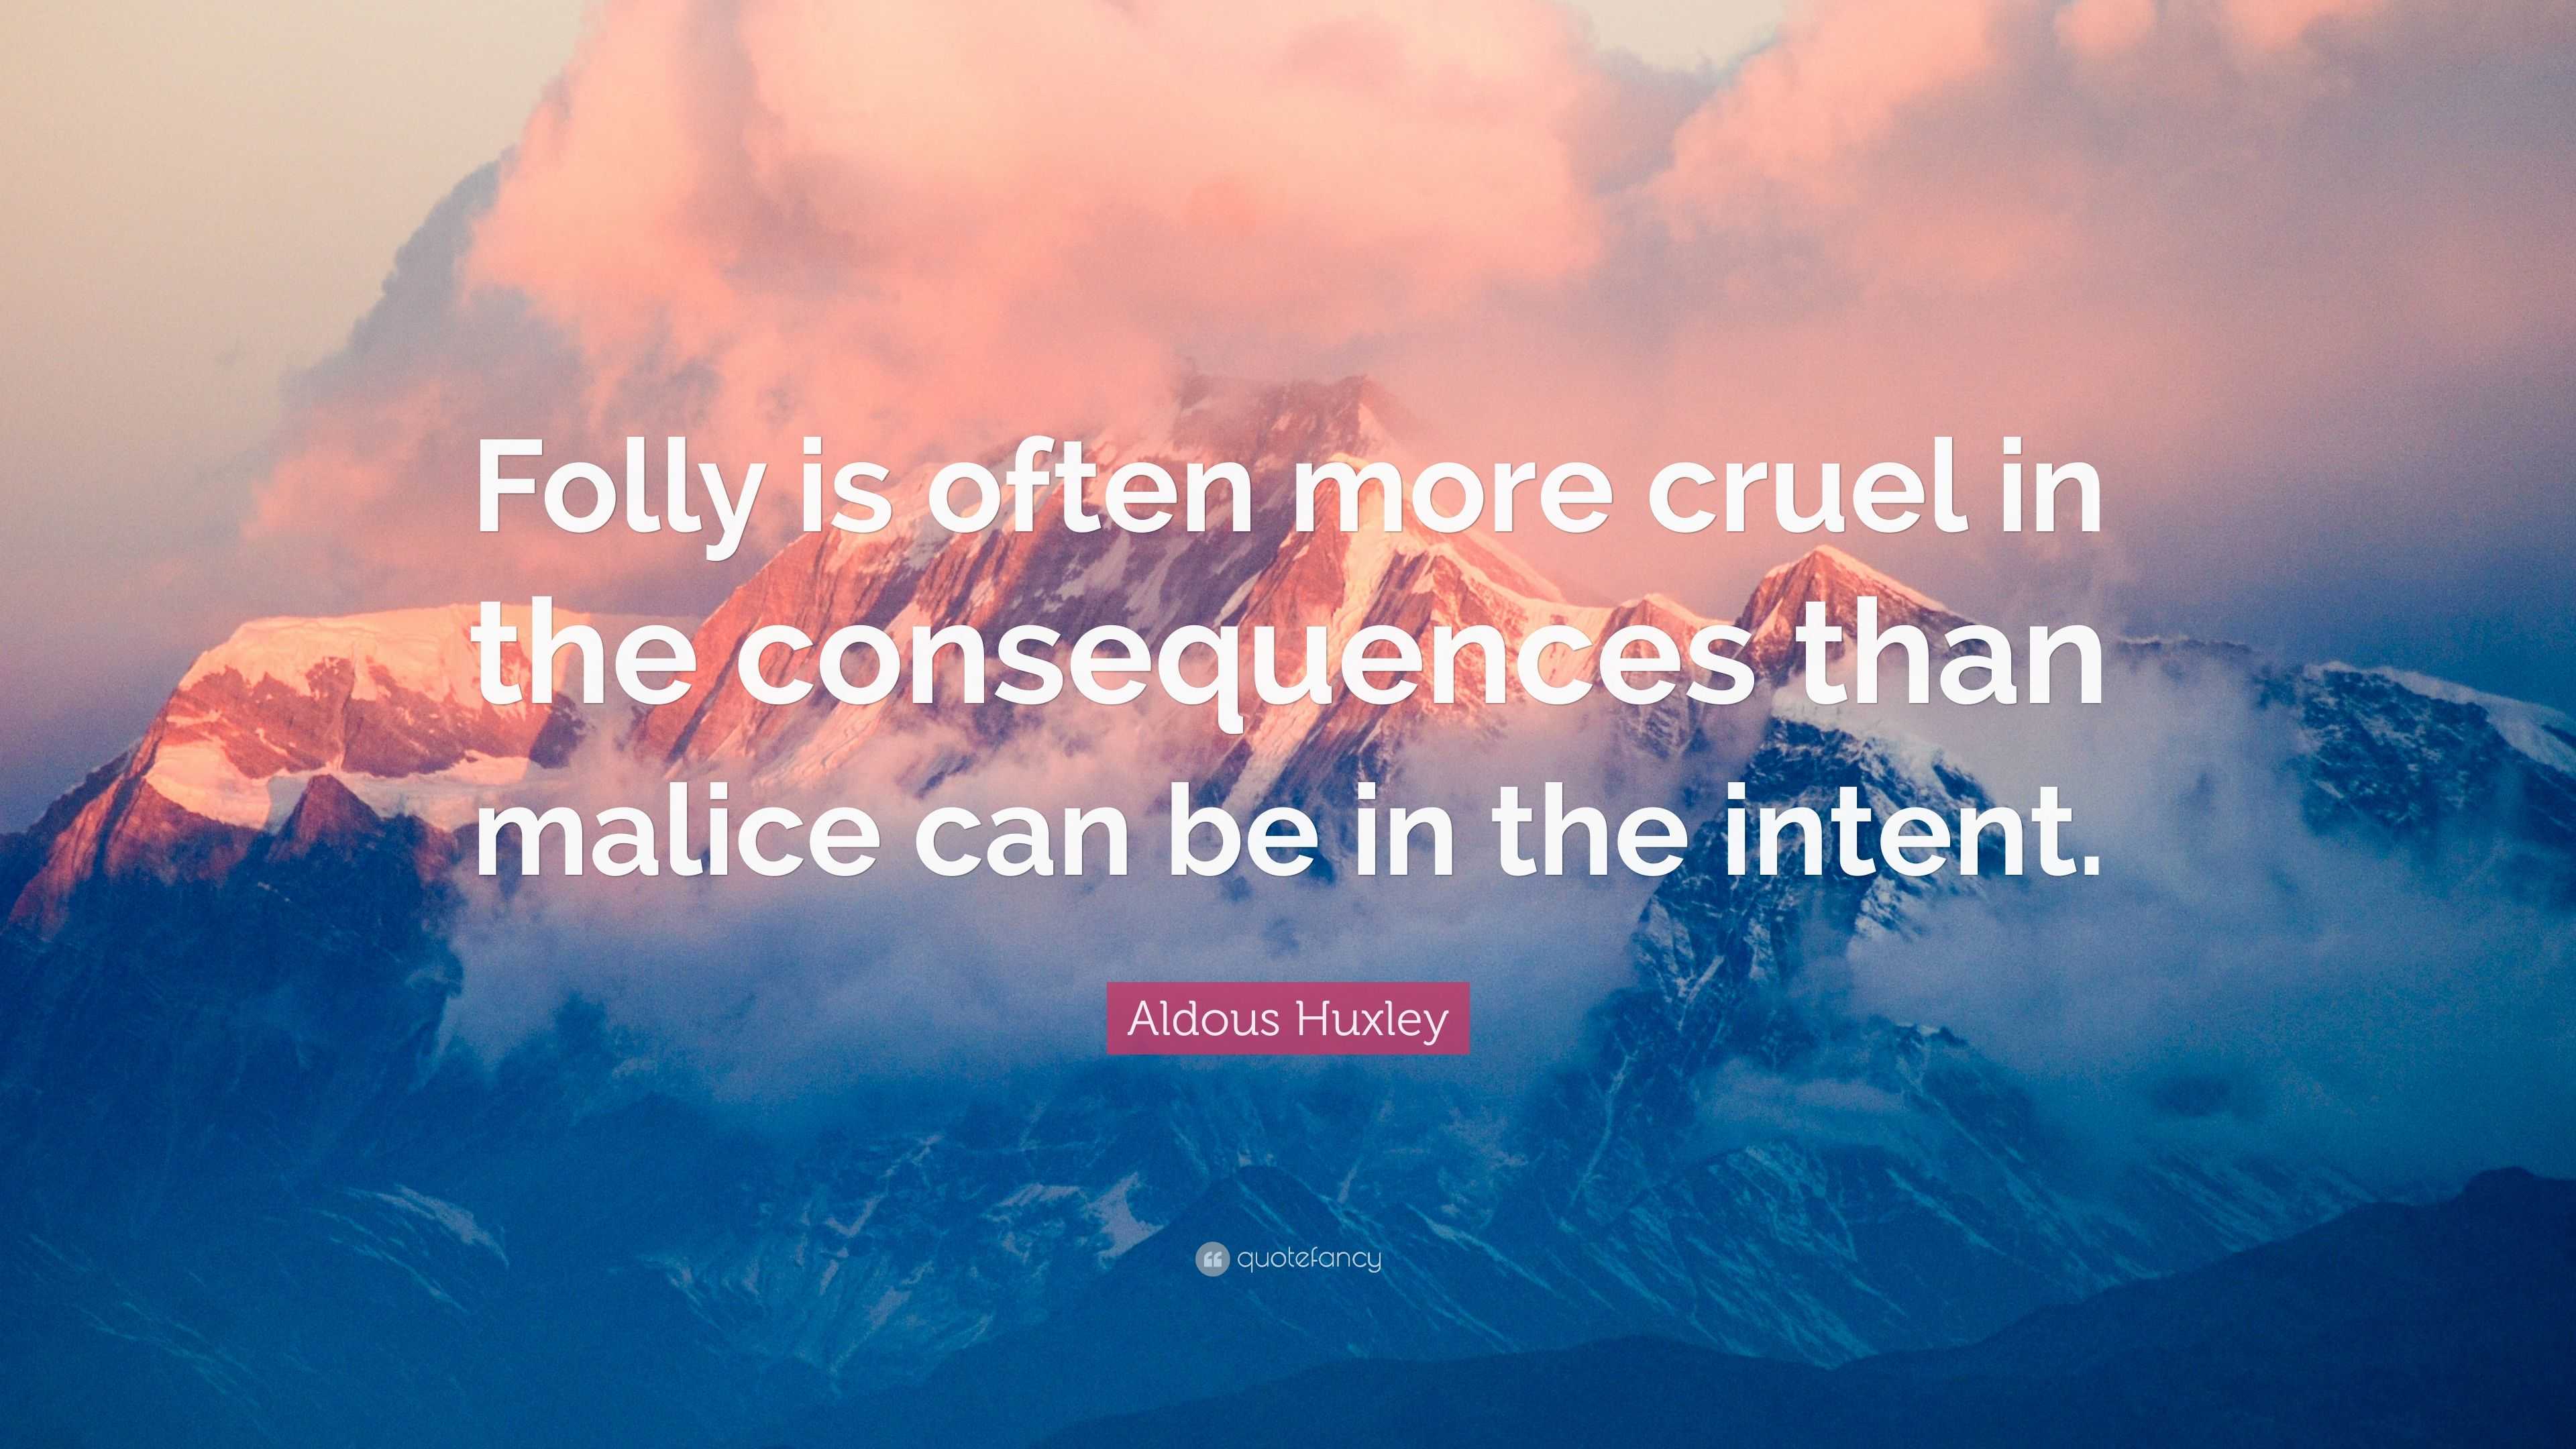 https://quotefancy.com/media/wallpaper/3840x2160/4830189-Aldous-Huxley-Quote-Folly-is-often-more-cruel-in-the-consequences.jpg